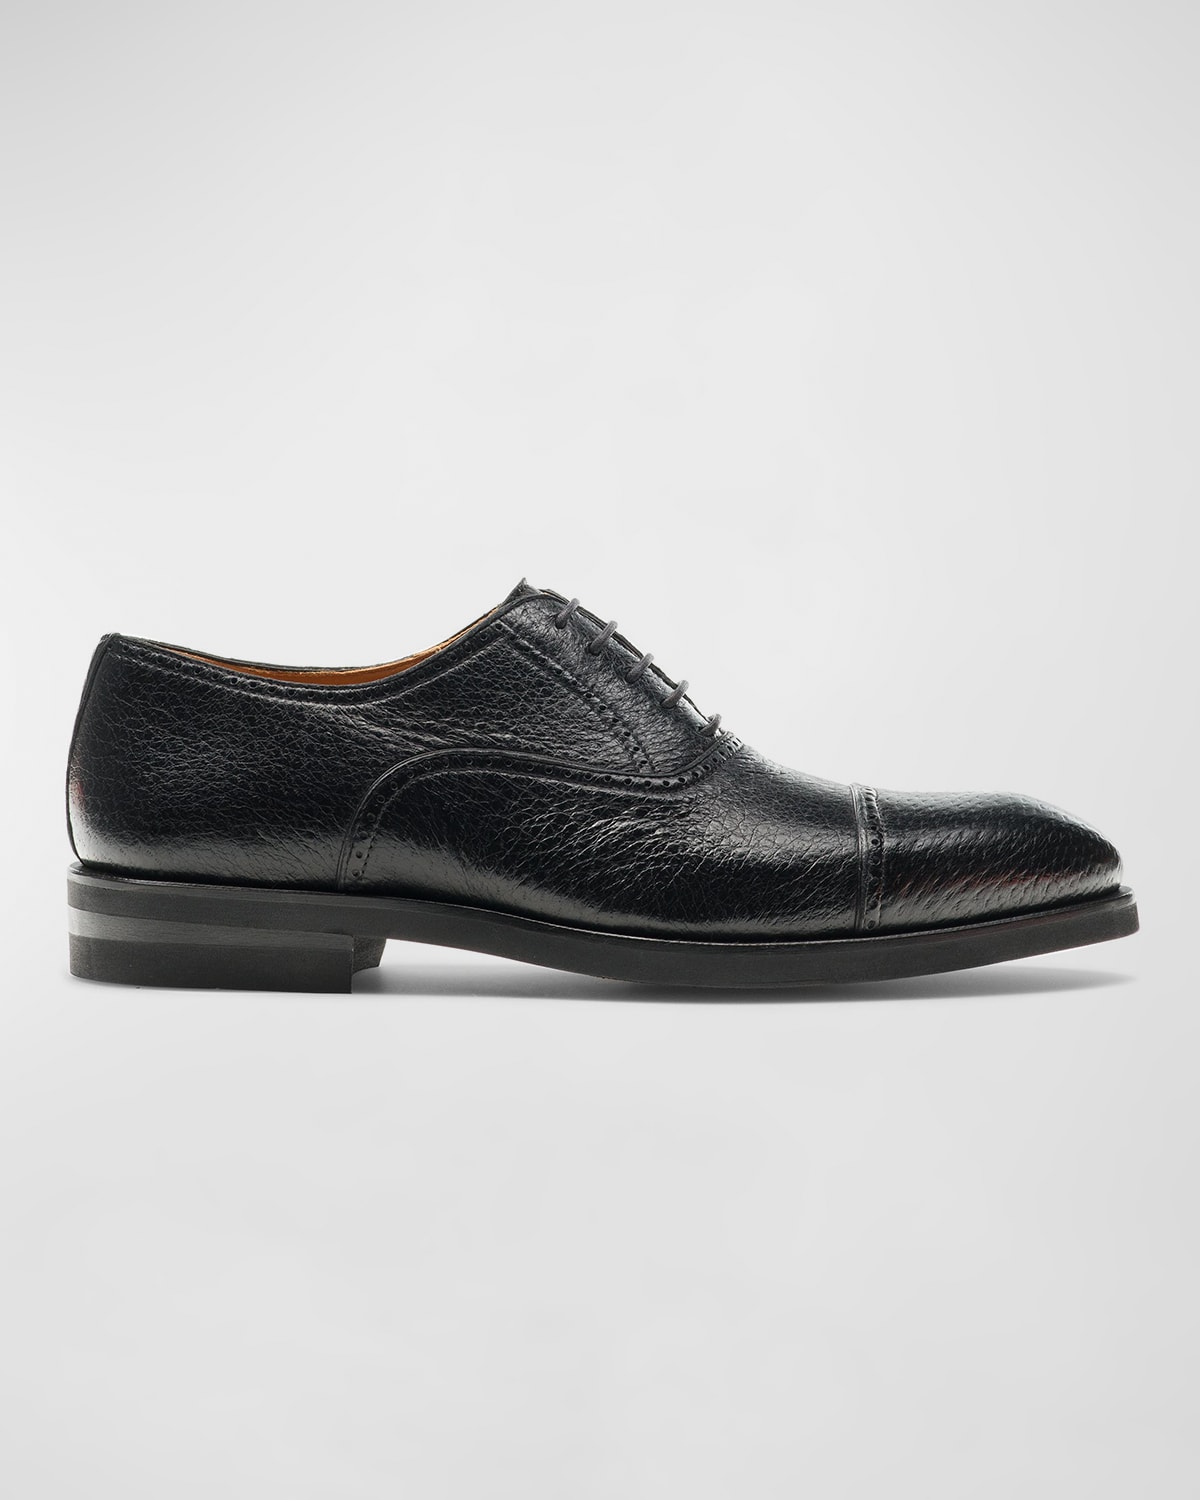 Magnanni Men's Ica Brogue Peccary Leather Oxfords In Black